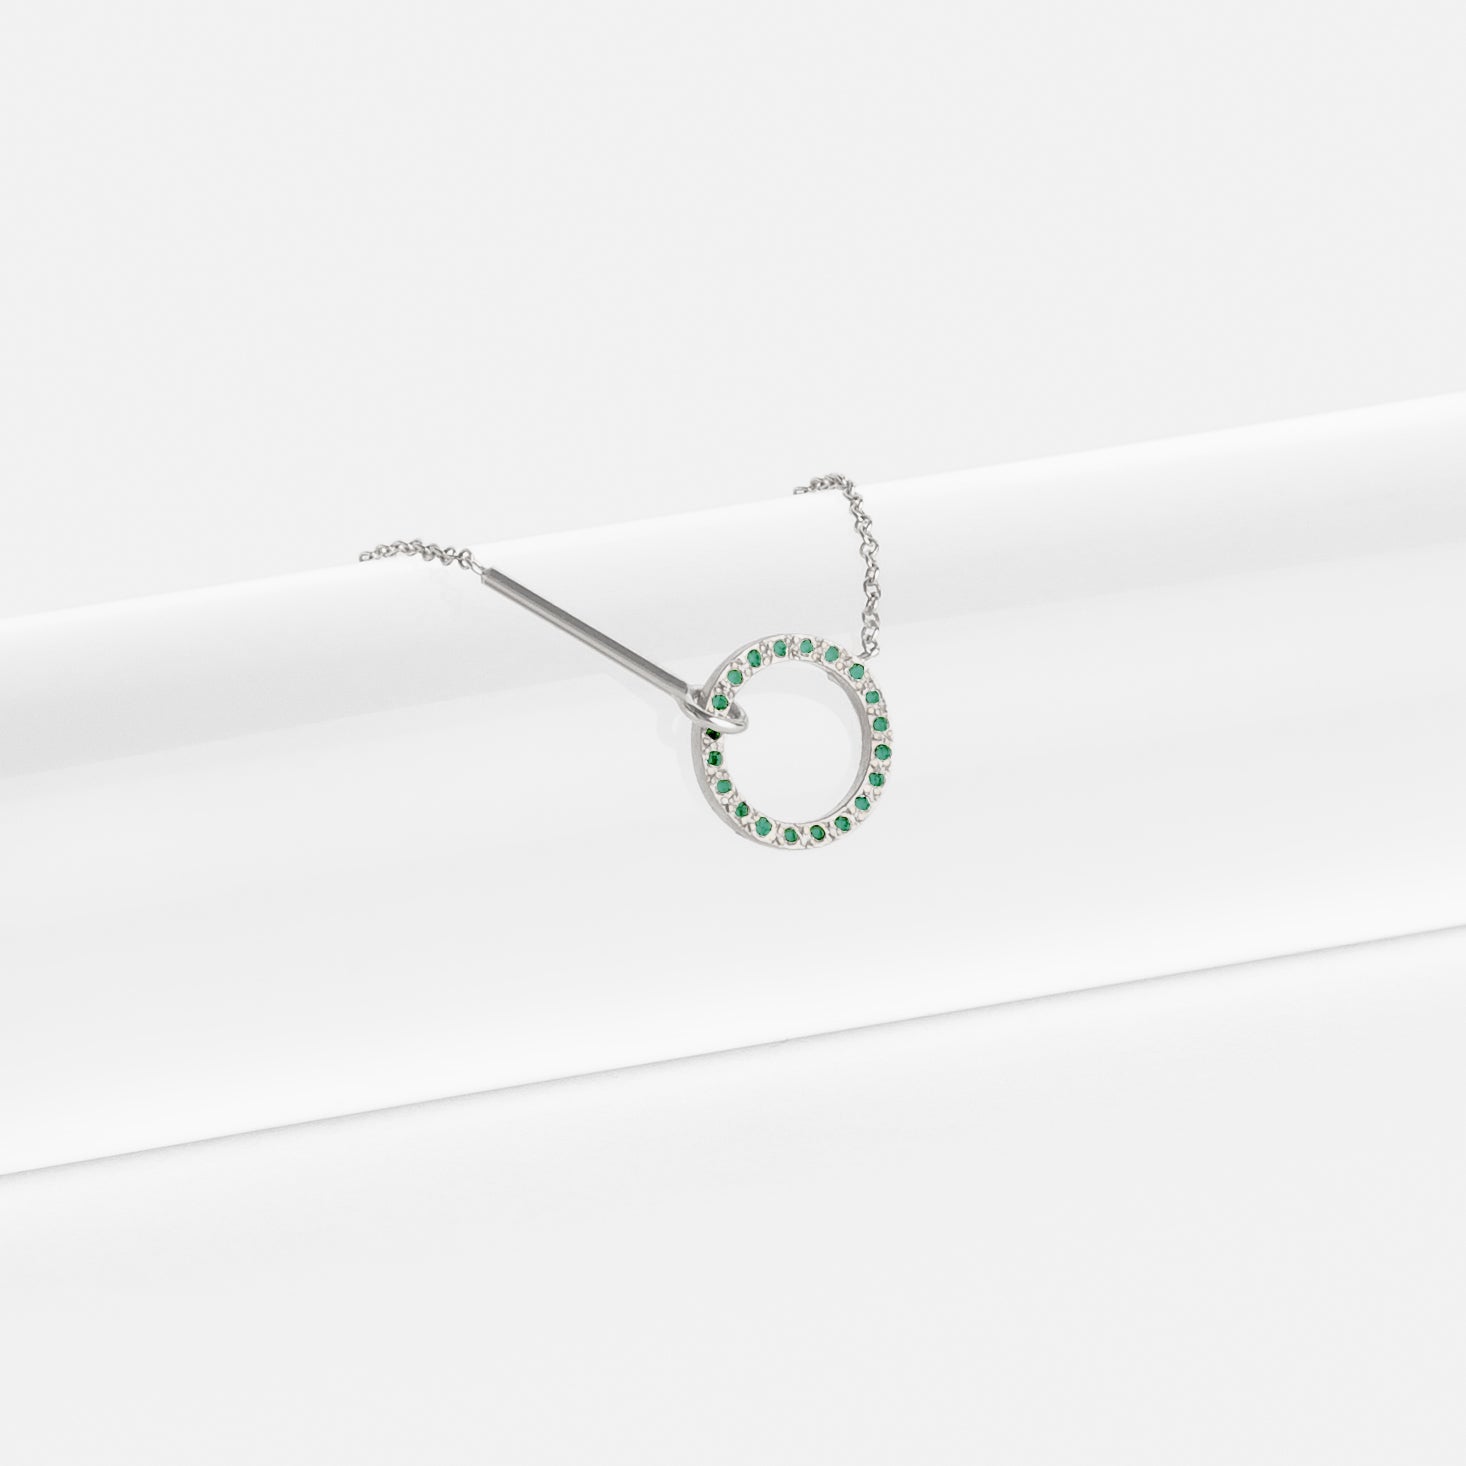 Visata Unconventional Necklace in 14k White Gold set with Emeralds By SHW Fine Jewelry NYC